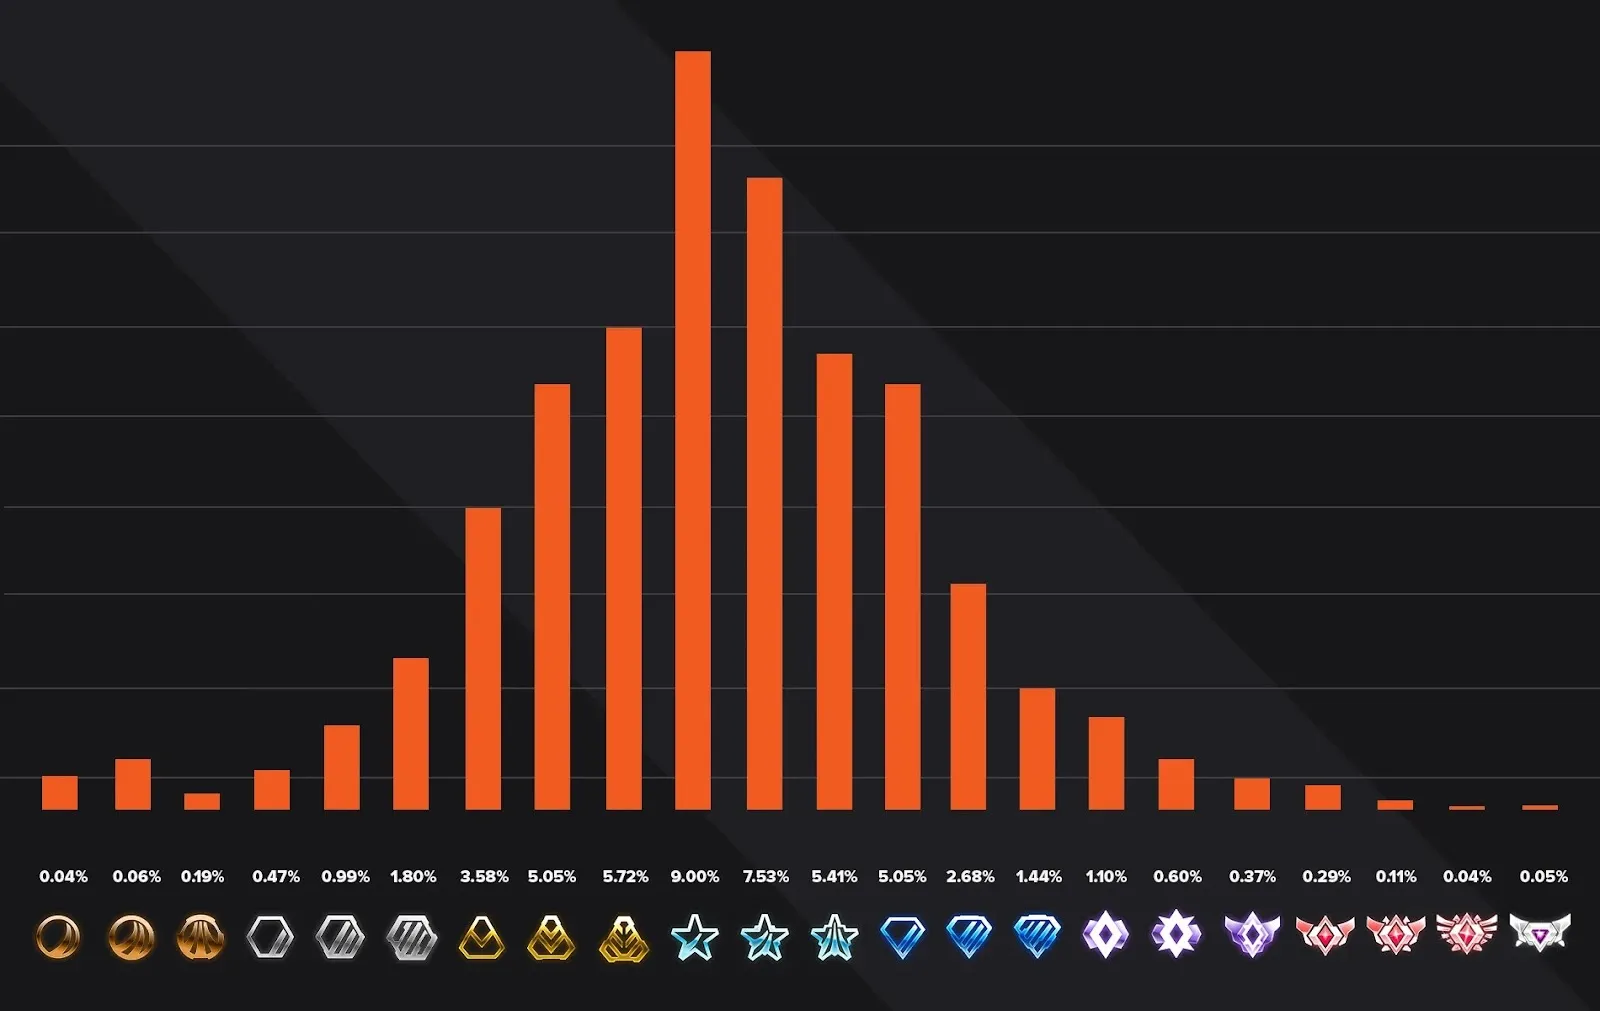 Here is the rank distribution for 1v1 in Rocket League. | Image Credit: The Global Gaming